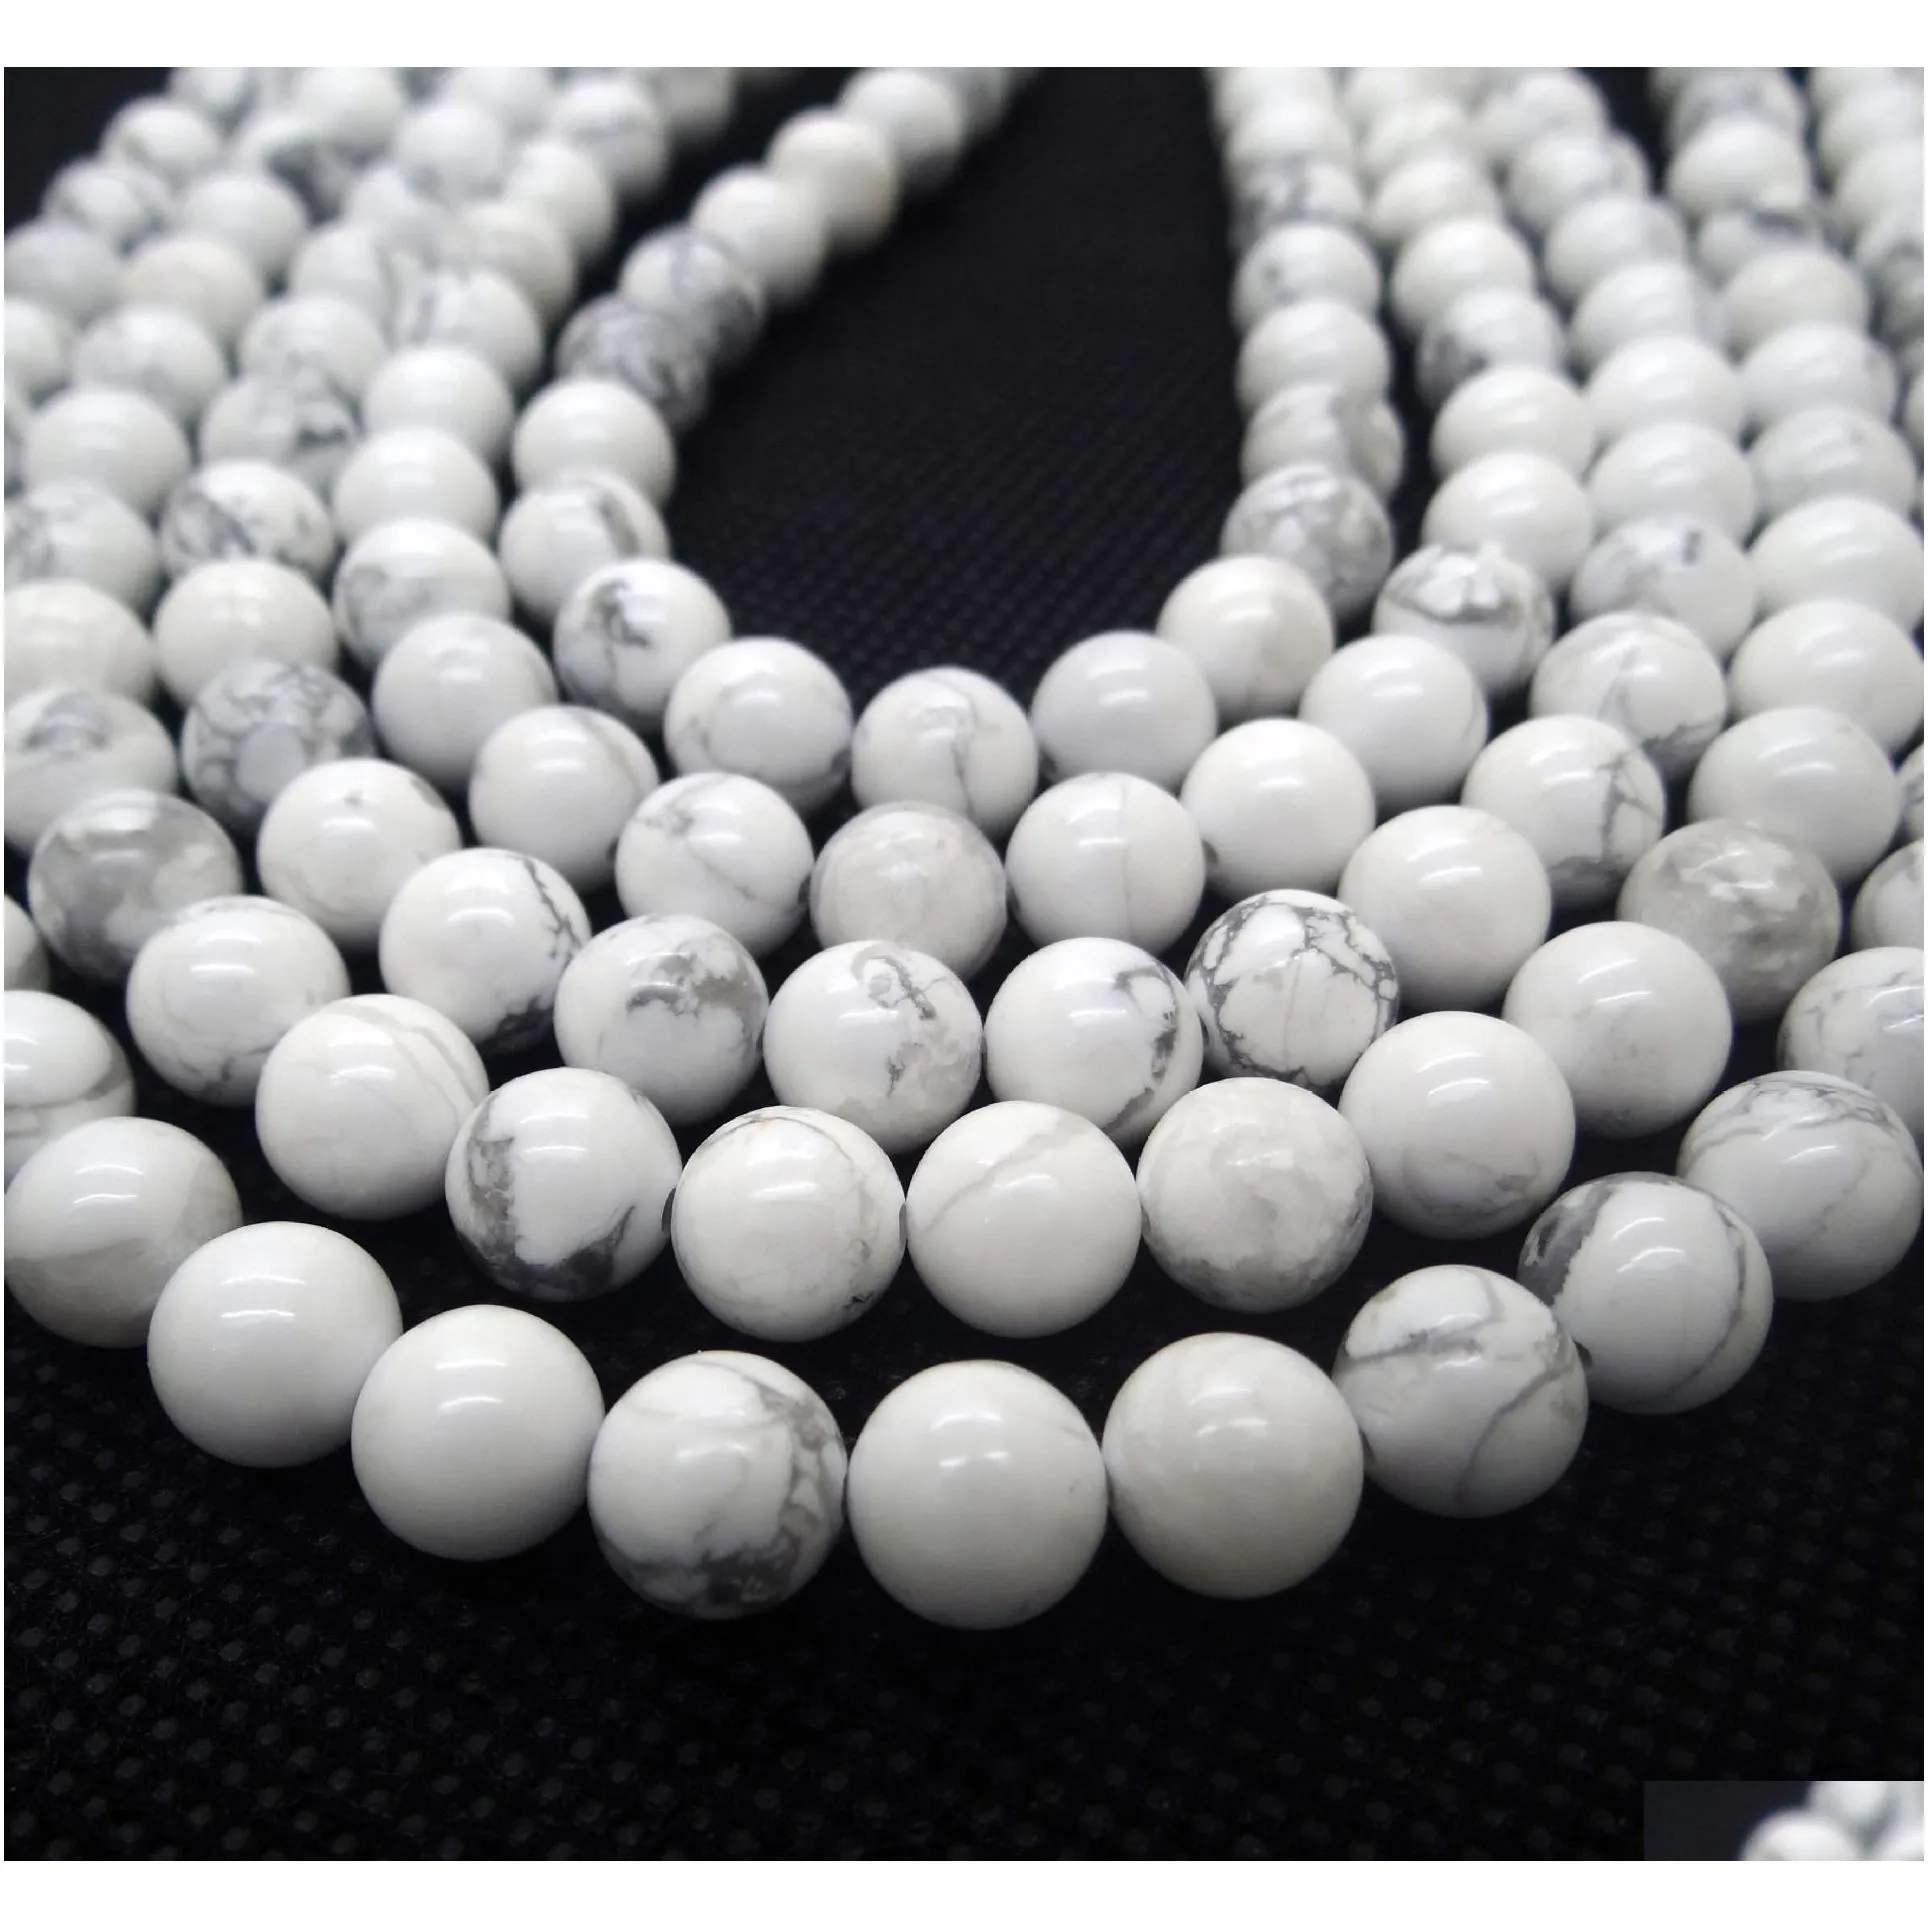 bohemia natural stone white turquoise loose gem beads diy jewelry making 4mm 6mm 8mm 10mm 12mm 14mm round 5 strands/lot for bracelet necklace ready